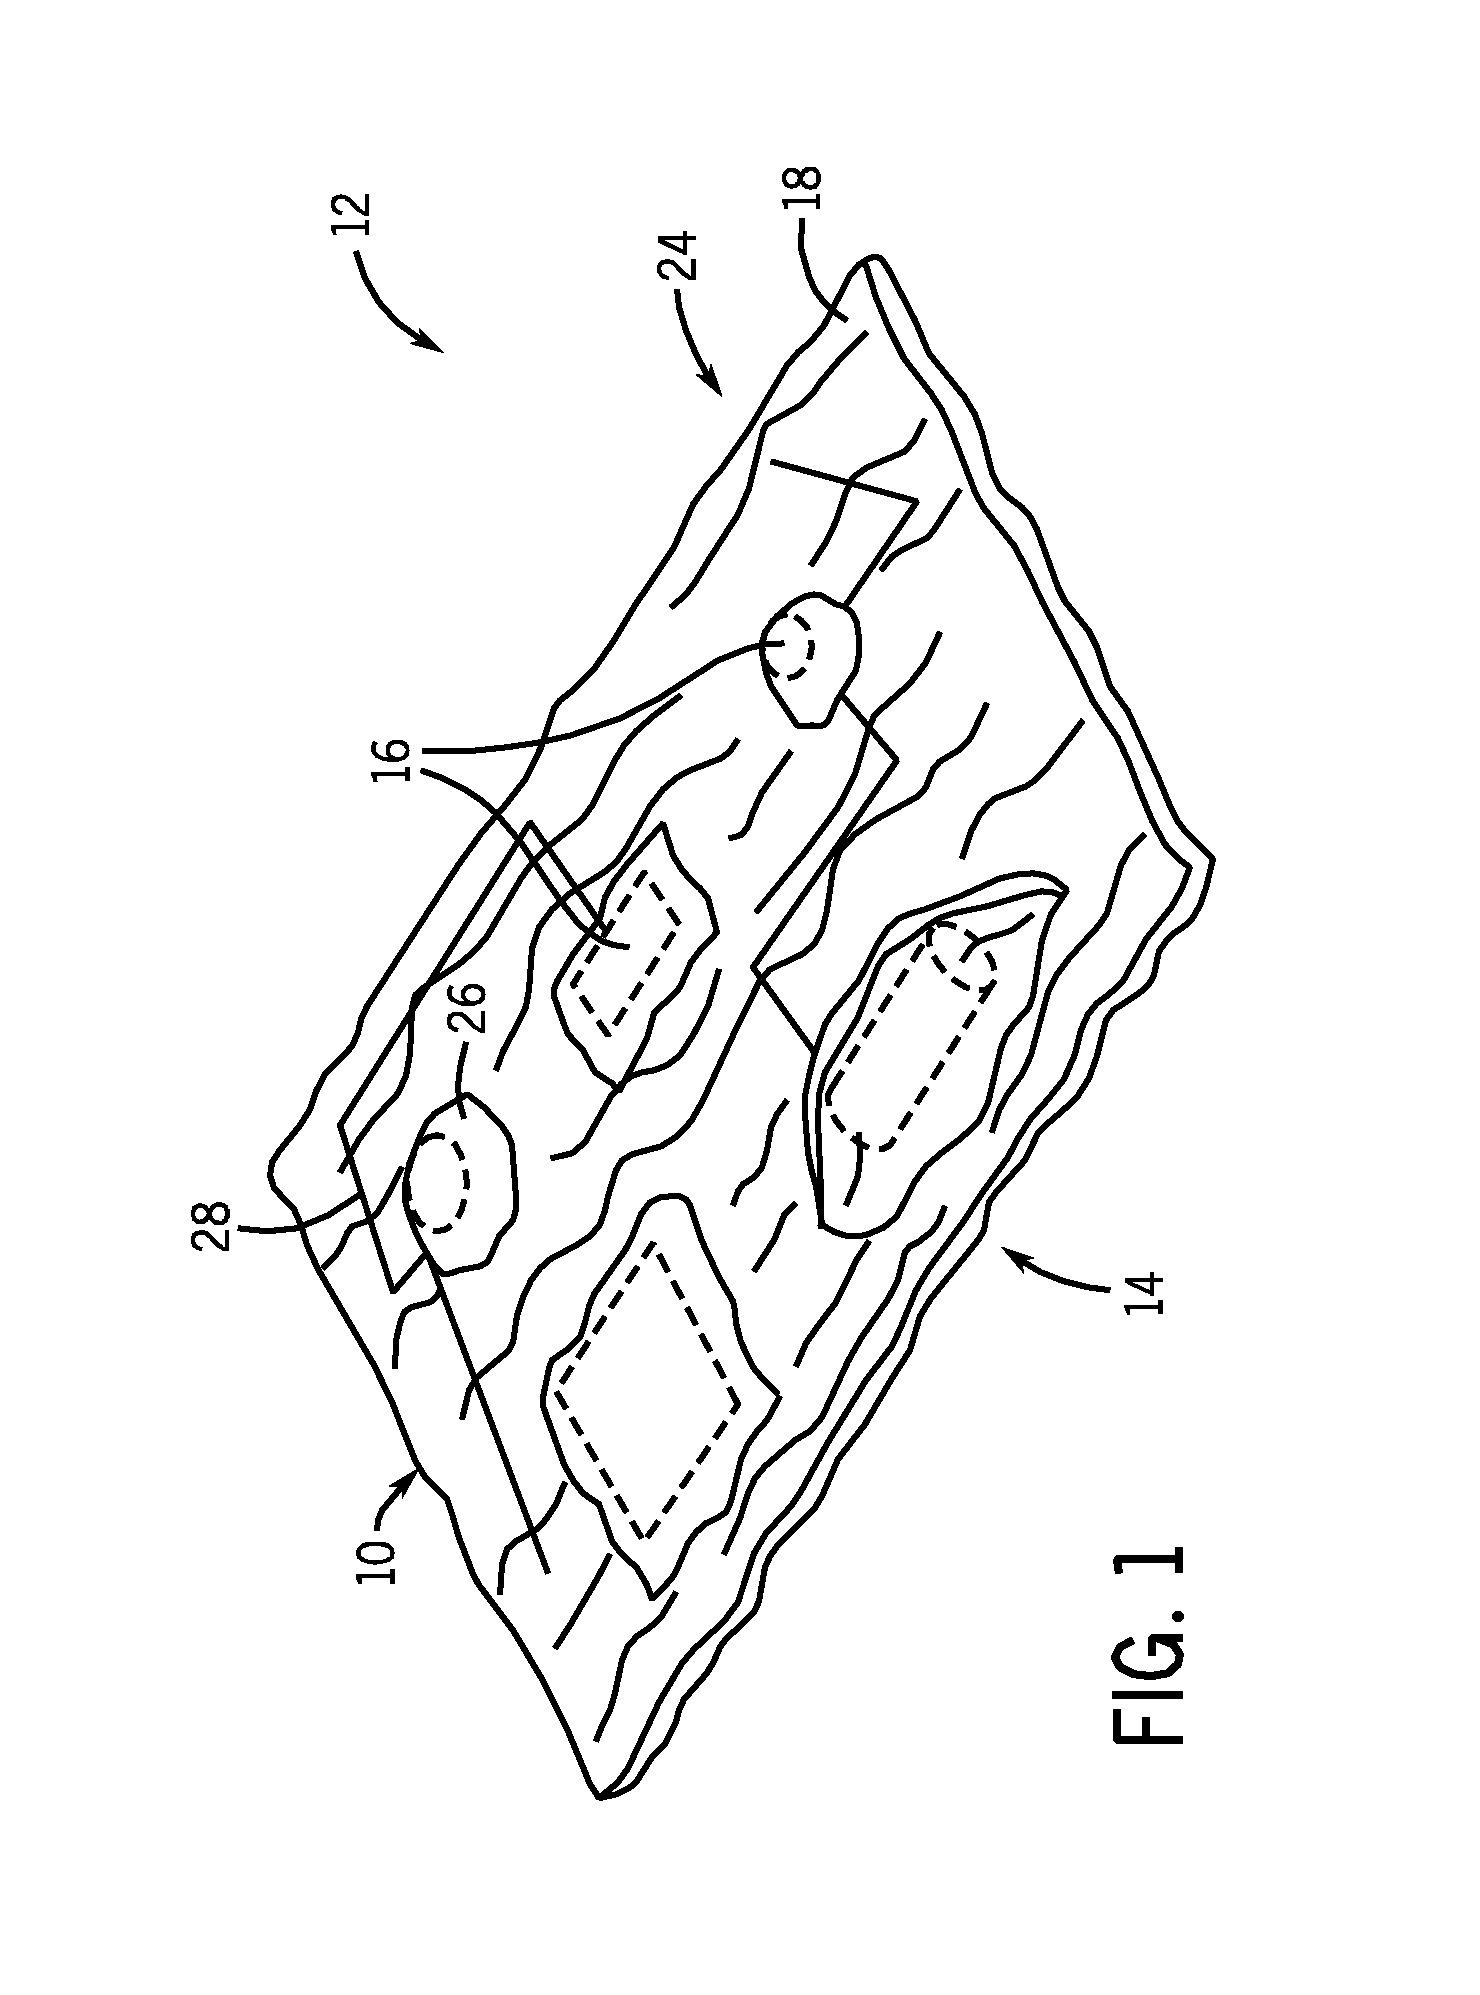 System and method of forming a patterned conformal structure